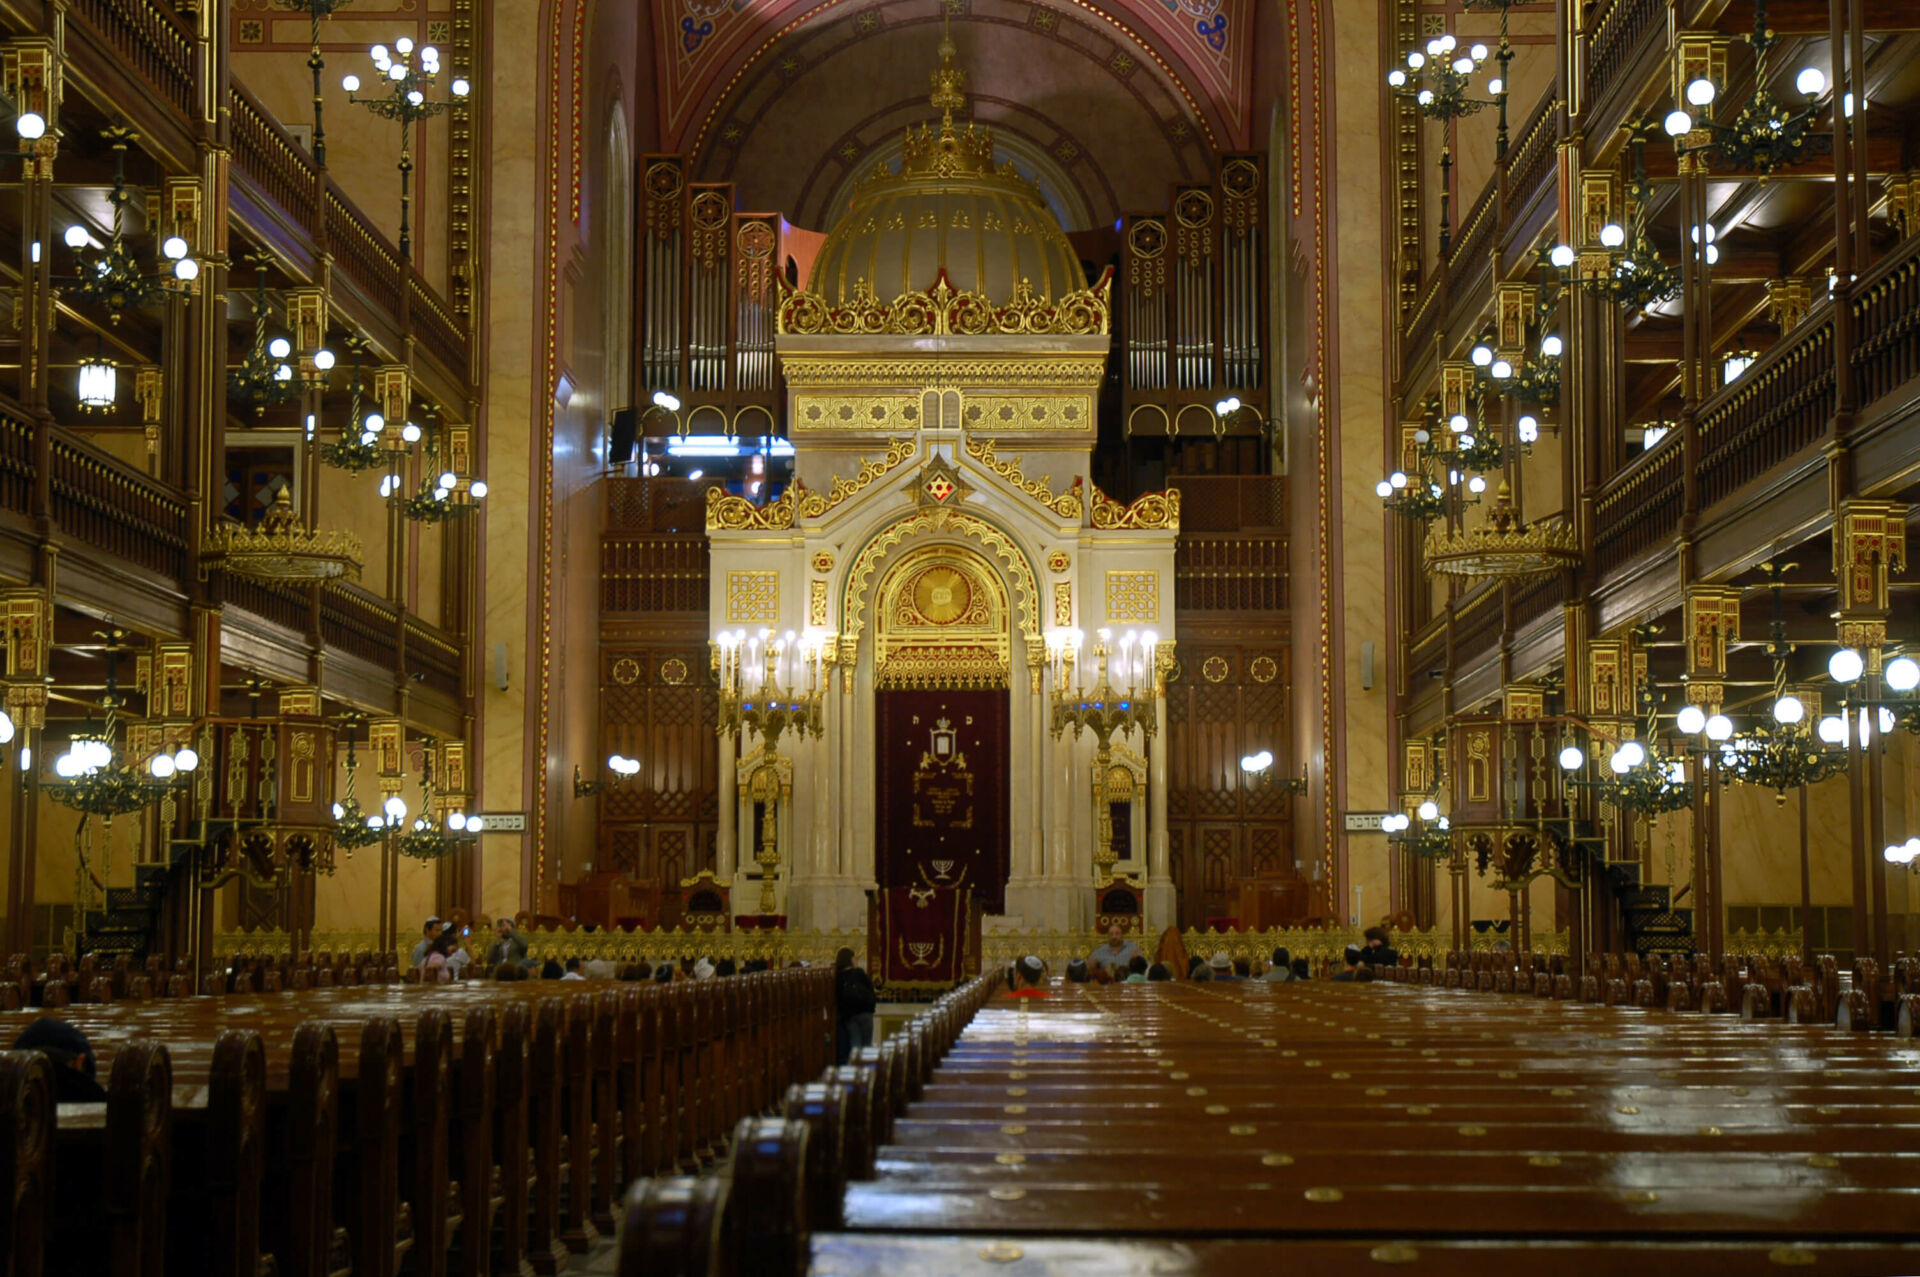 The exhilarating interior of the Dohány Street Synagogue